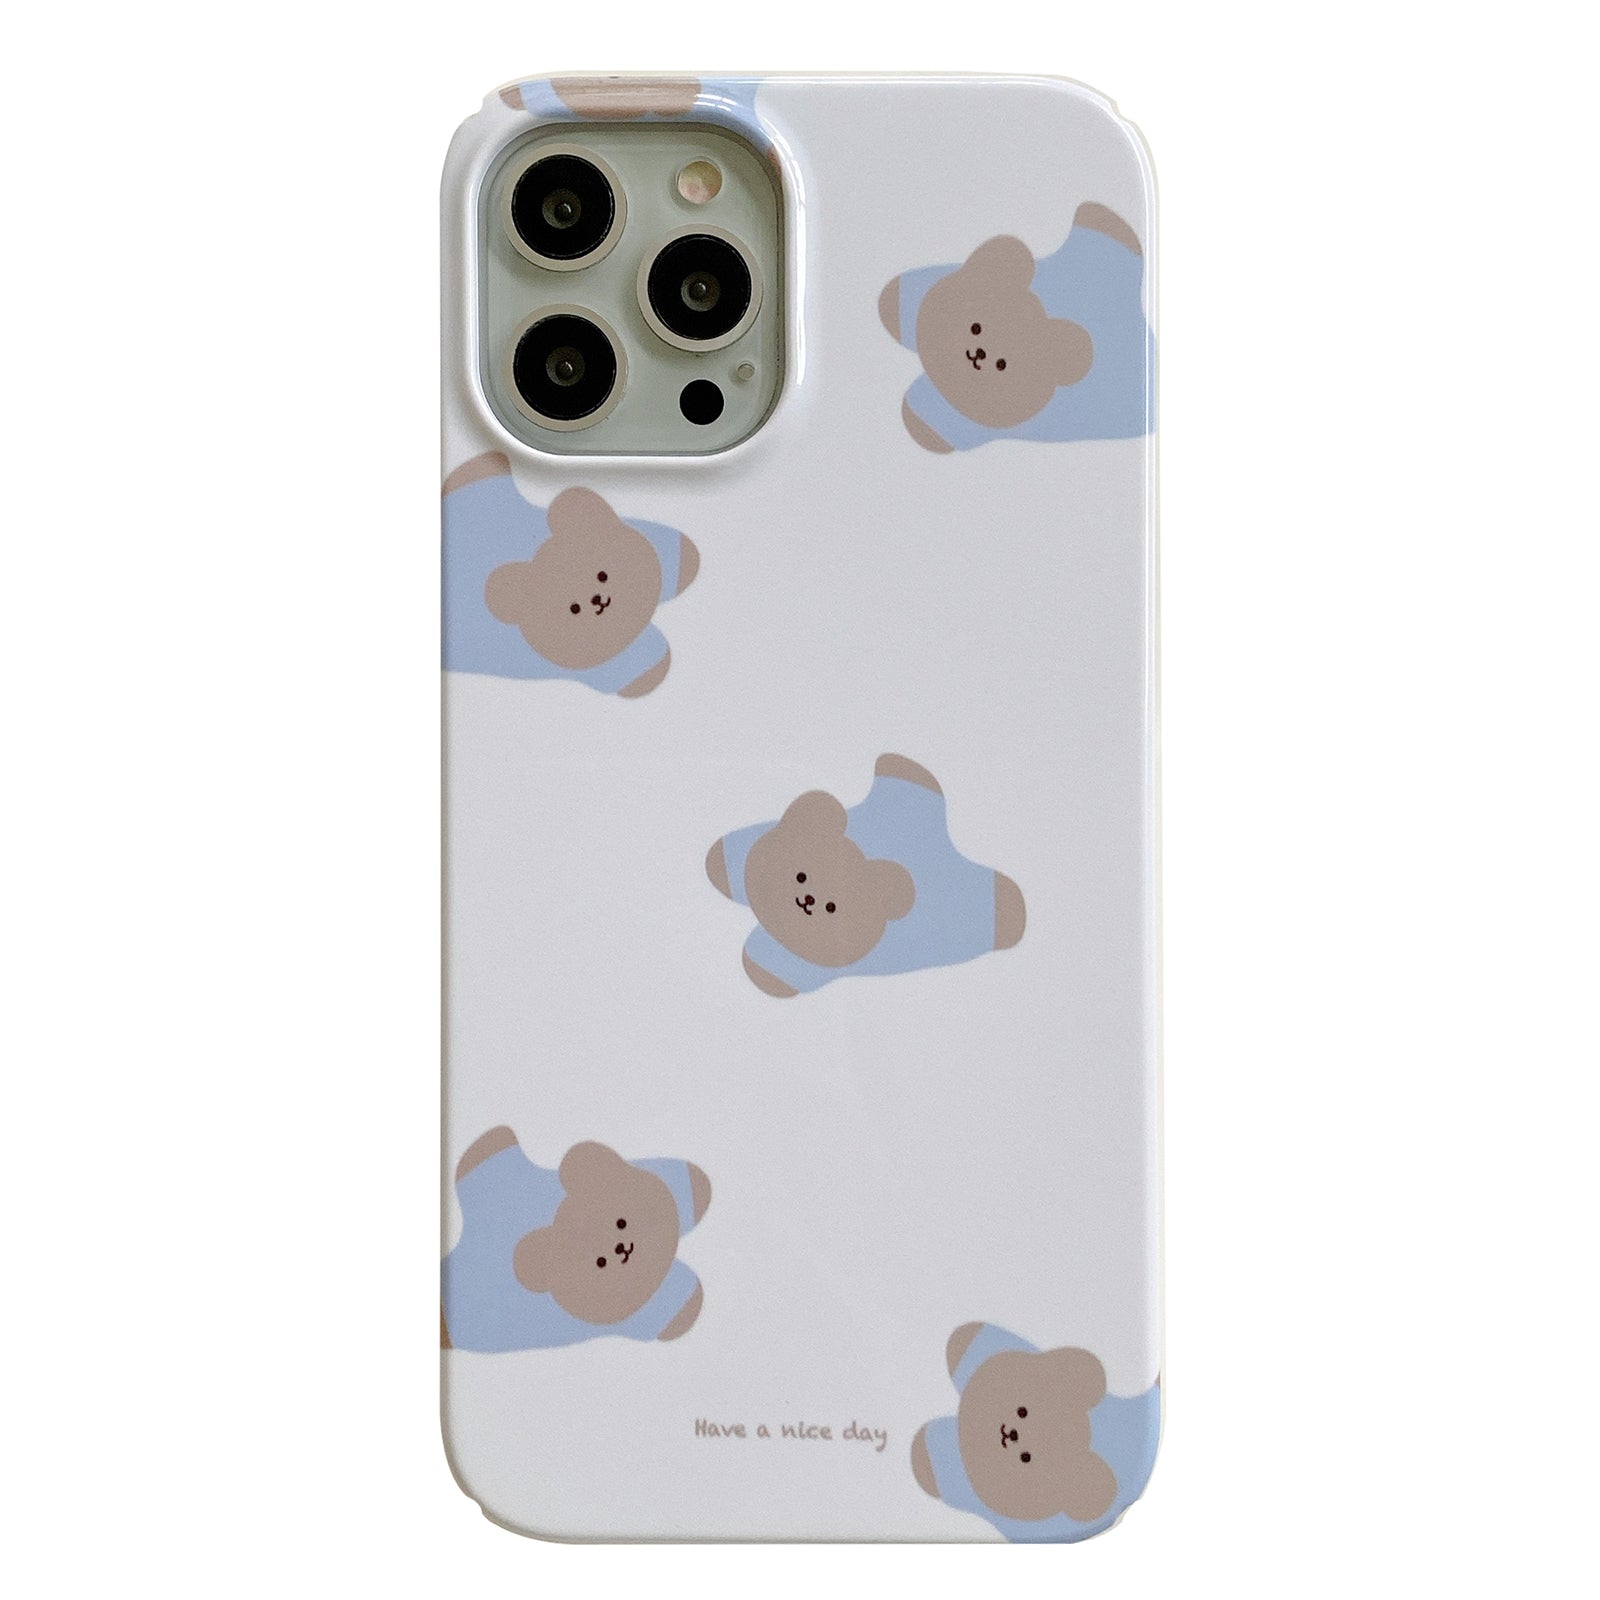 Hard PC Phone Cover for iPhone 12 Pro 6.1 inch Pattern Printing Anti-Drop Glossy Phone Case - Bears